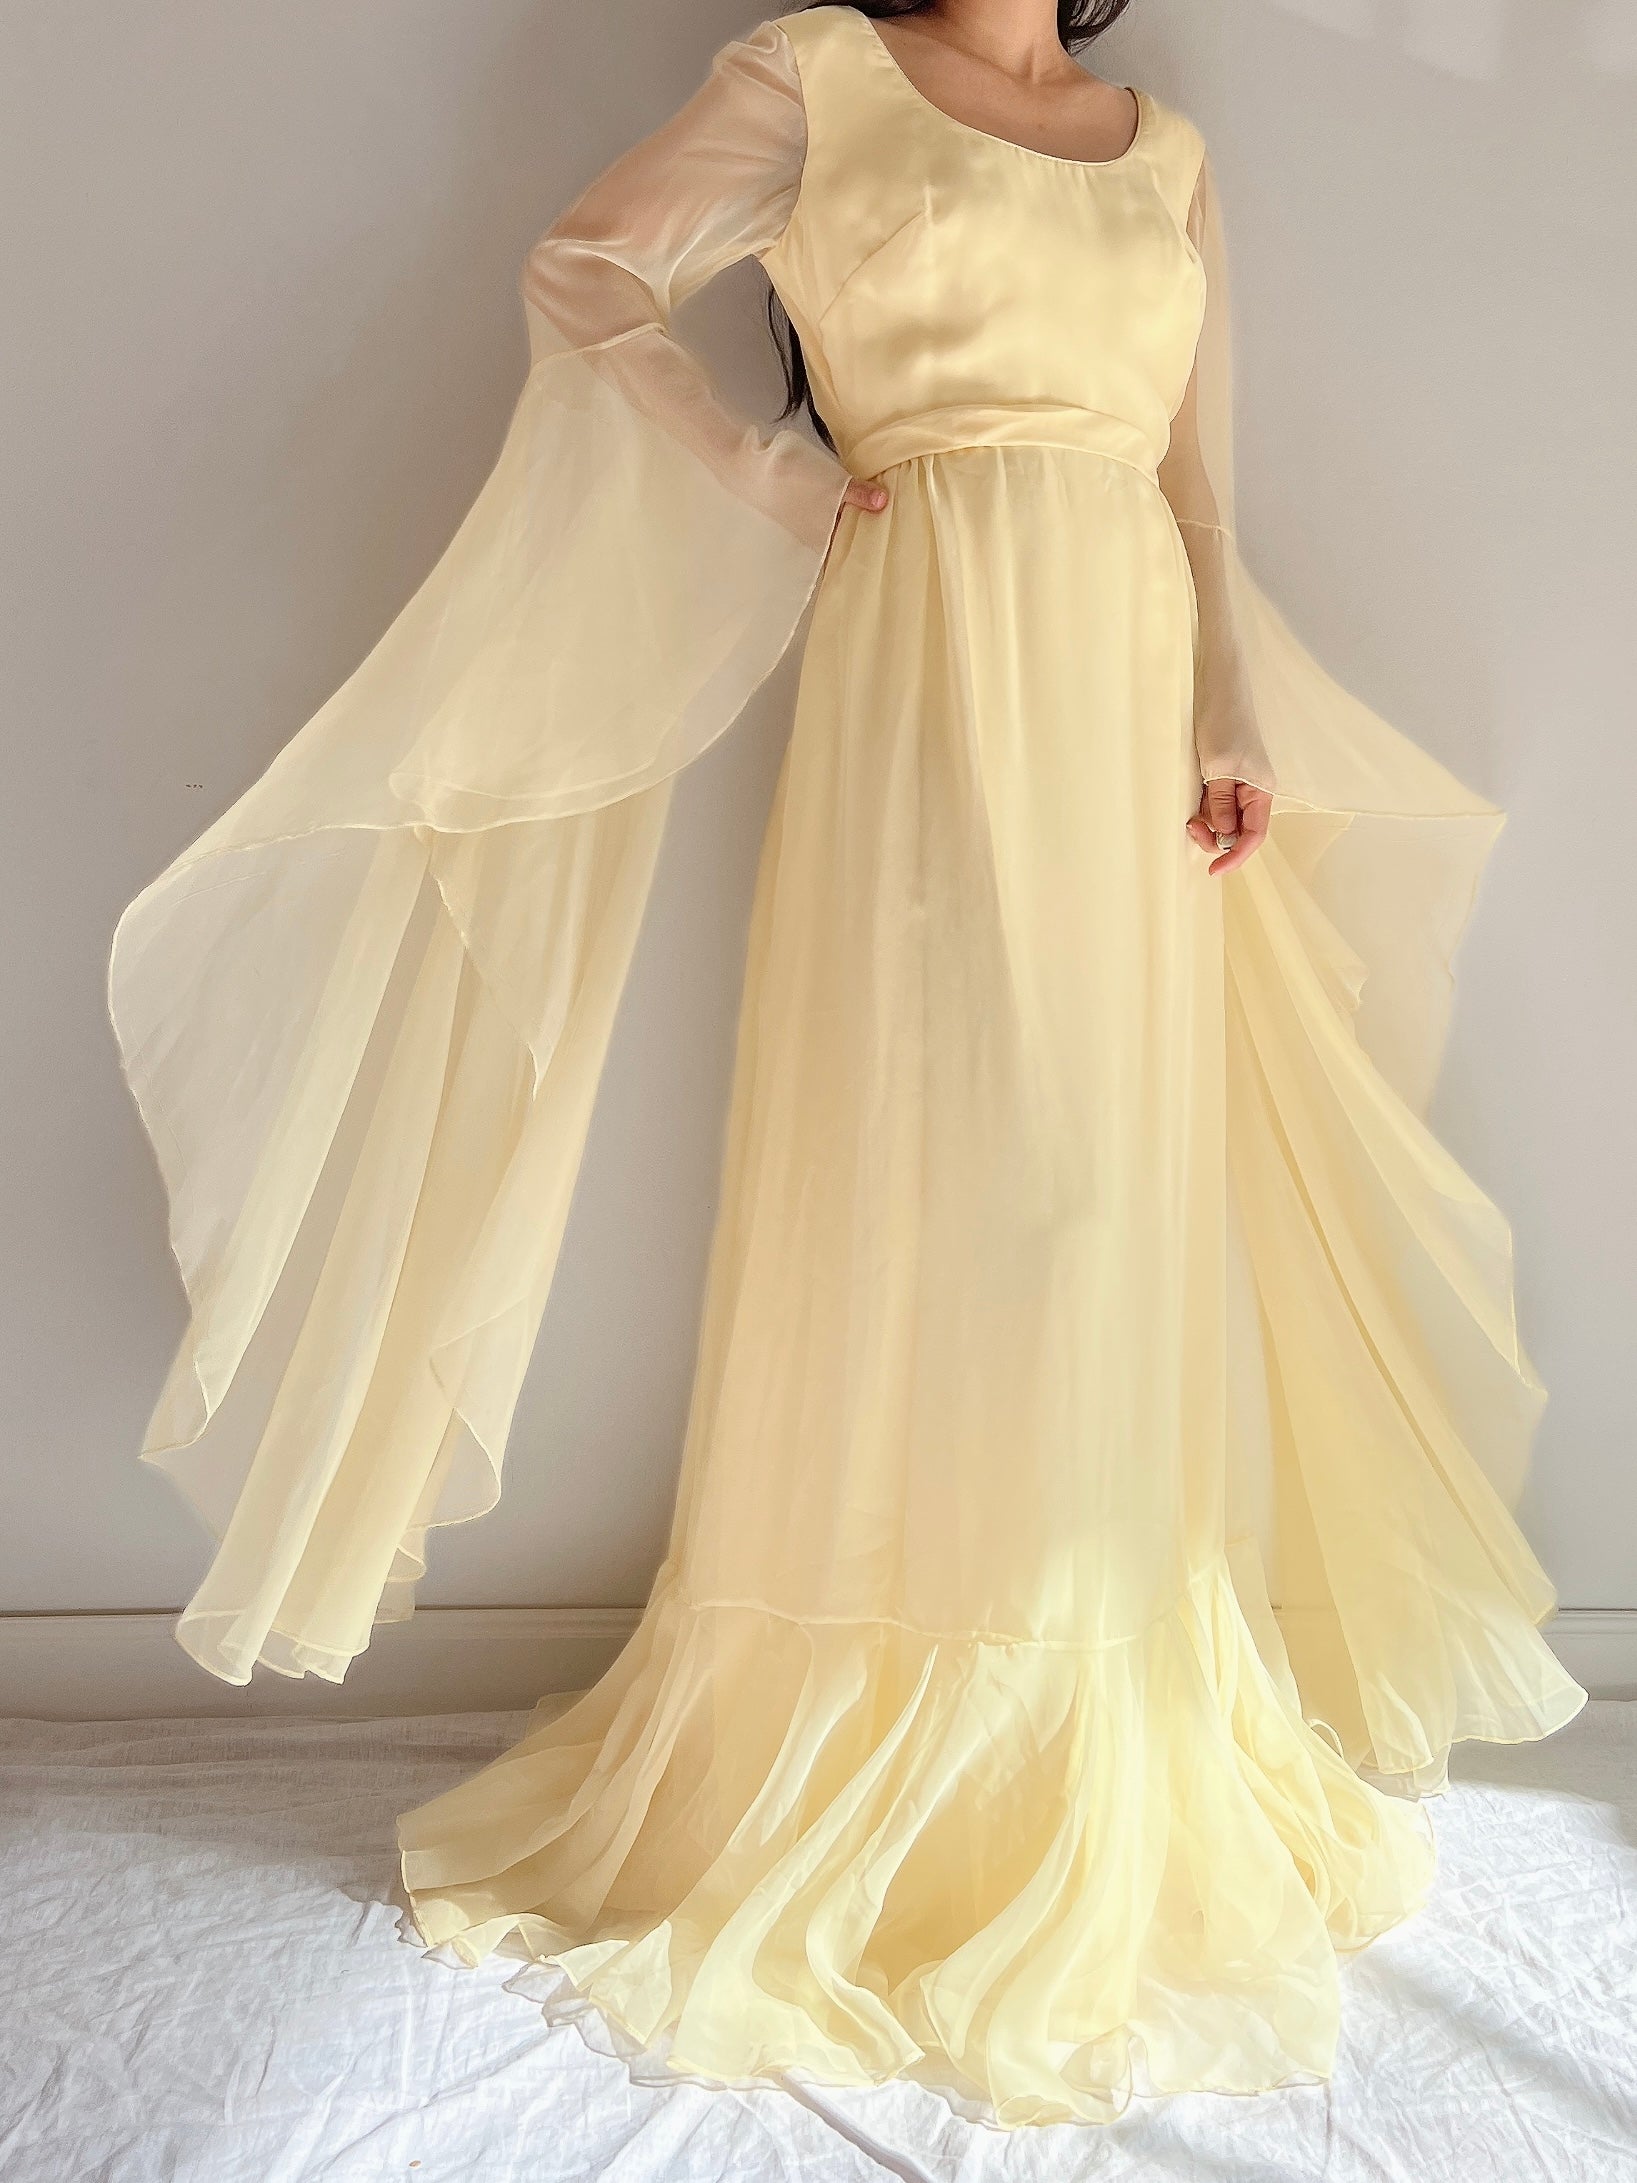 1960s Angel Sleeves Chiffon Gown - S